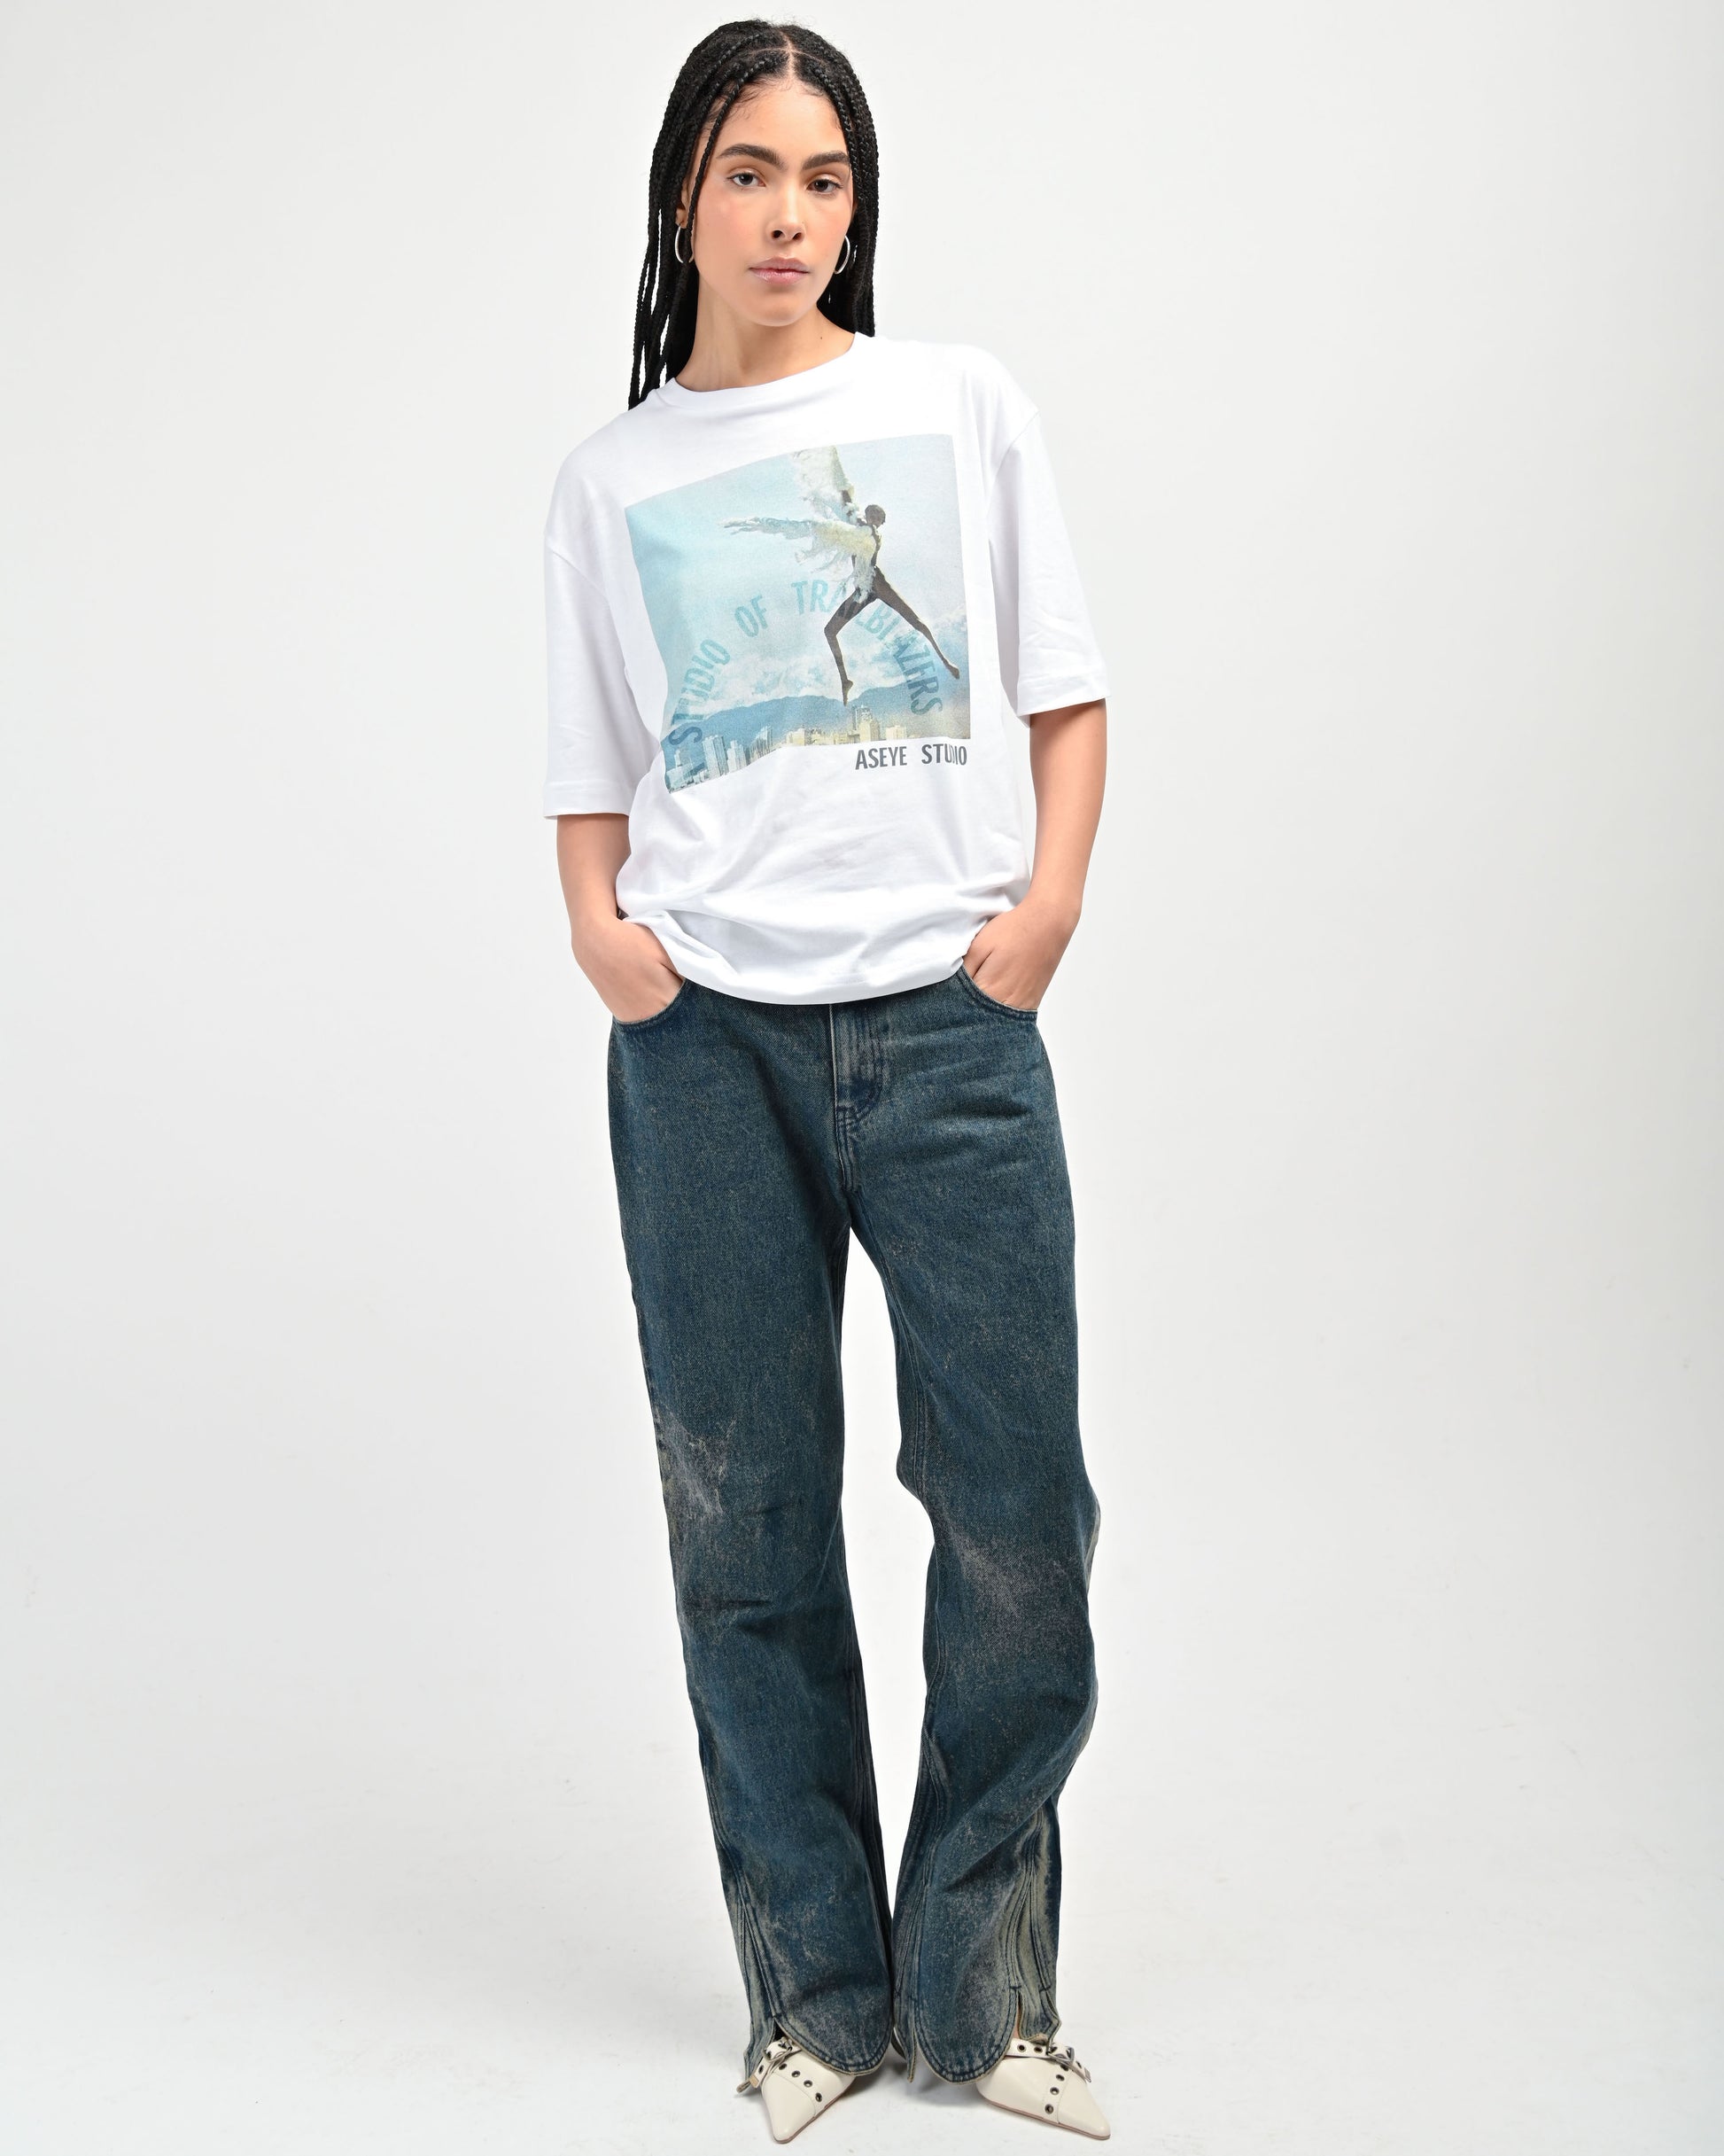 Model is wearing Studio of Trailblazers T-shirt in White by Aseye Studio featuring Donyale Luna Print